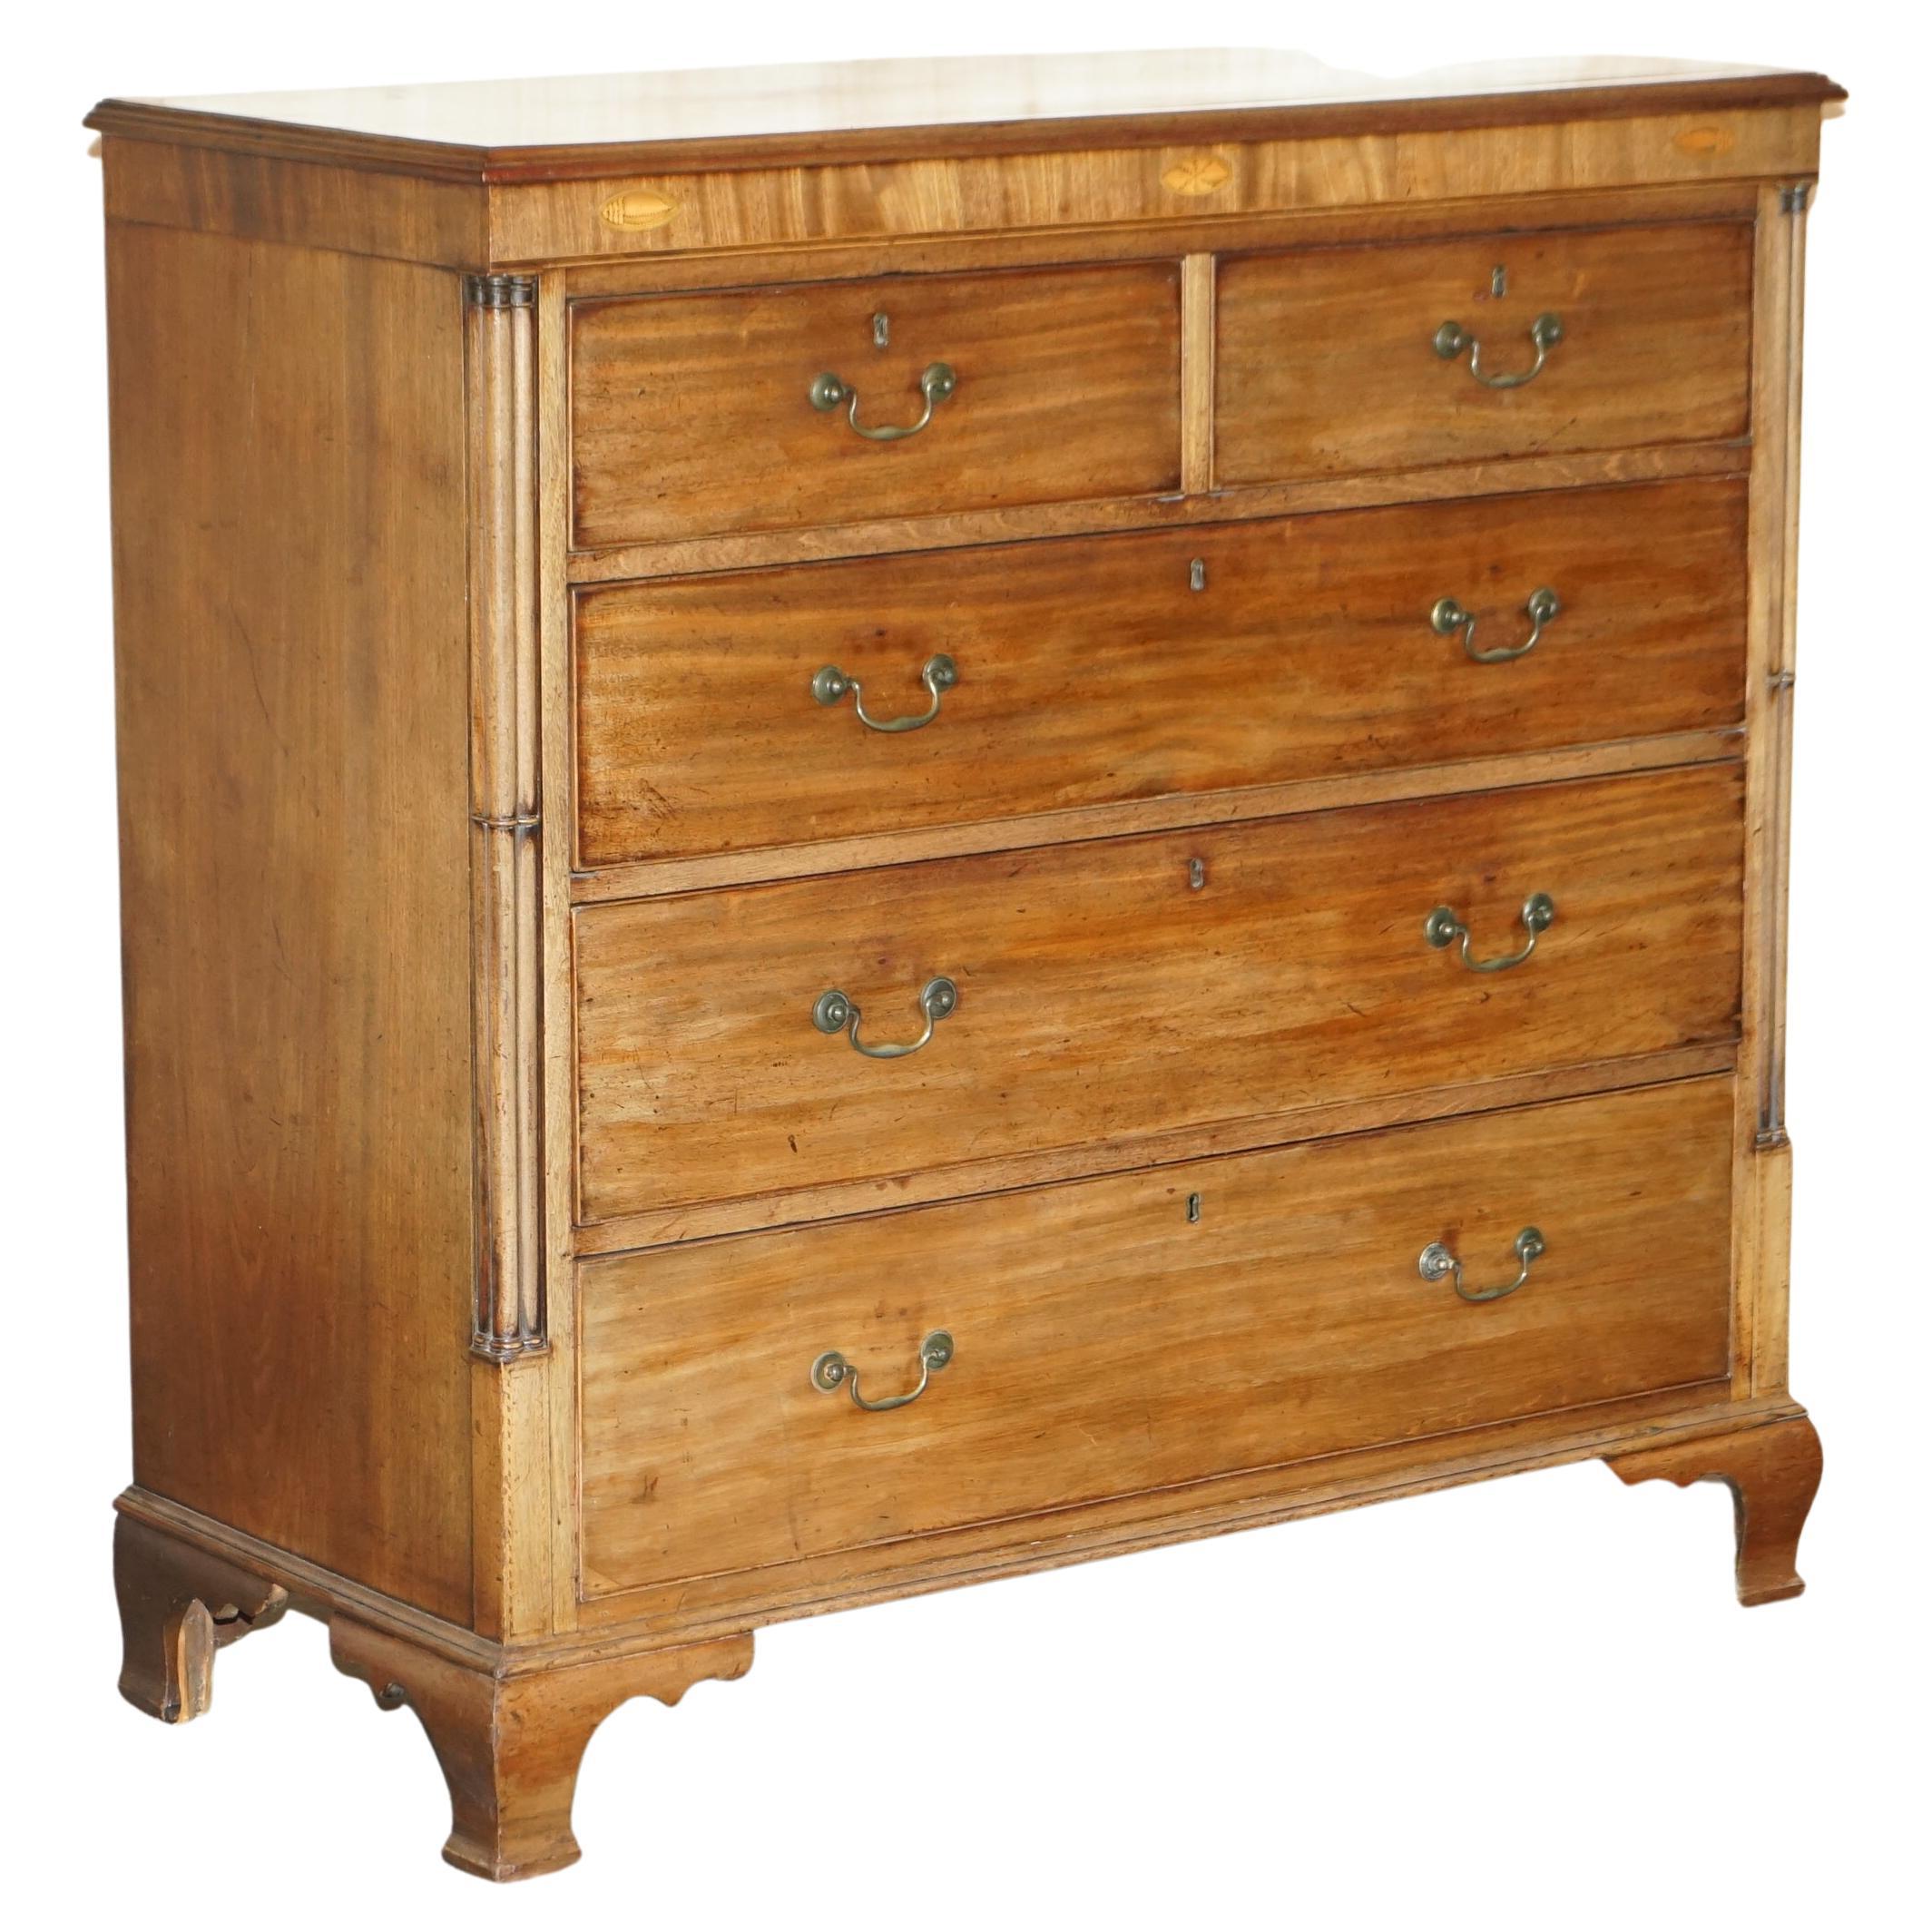 LARGE FiNE ANTIQUE THOMAS CHIPPENDALE SHERATON REVIVAL HARDWOOD CHEST OF DRAWERS im Angebot